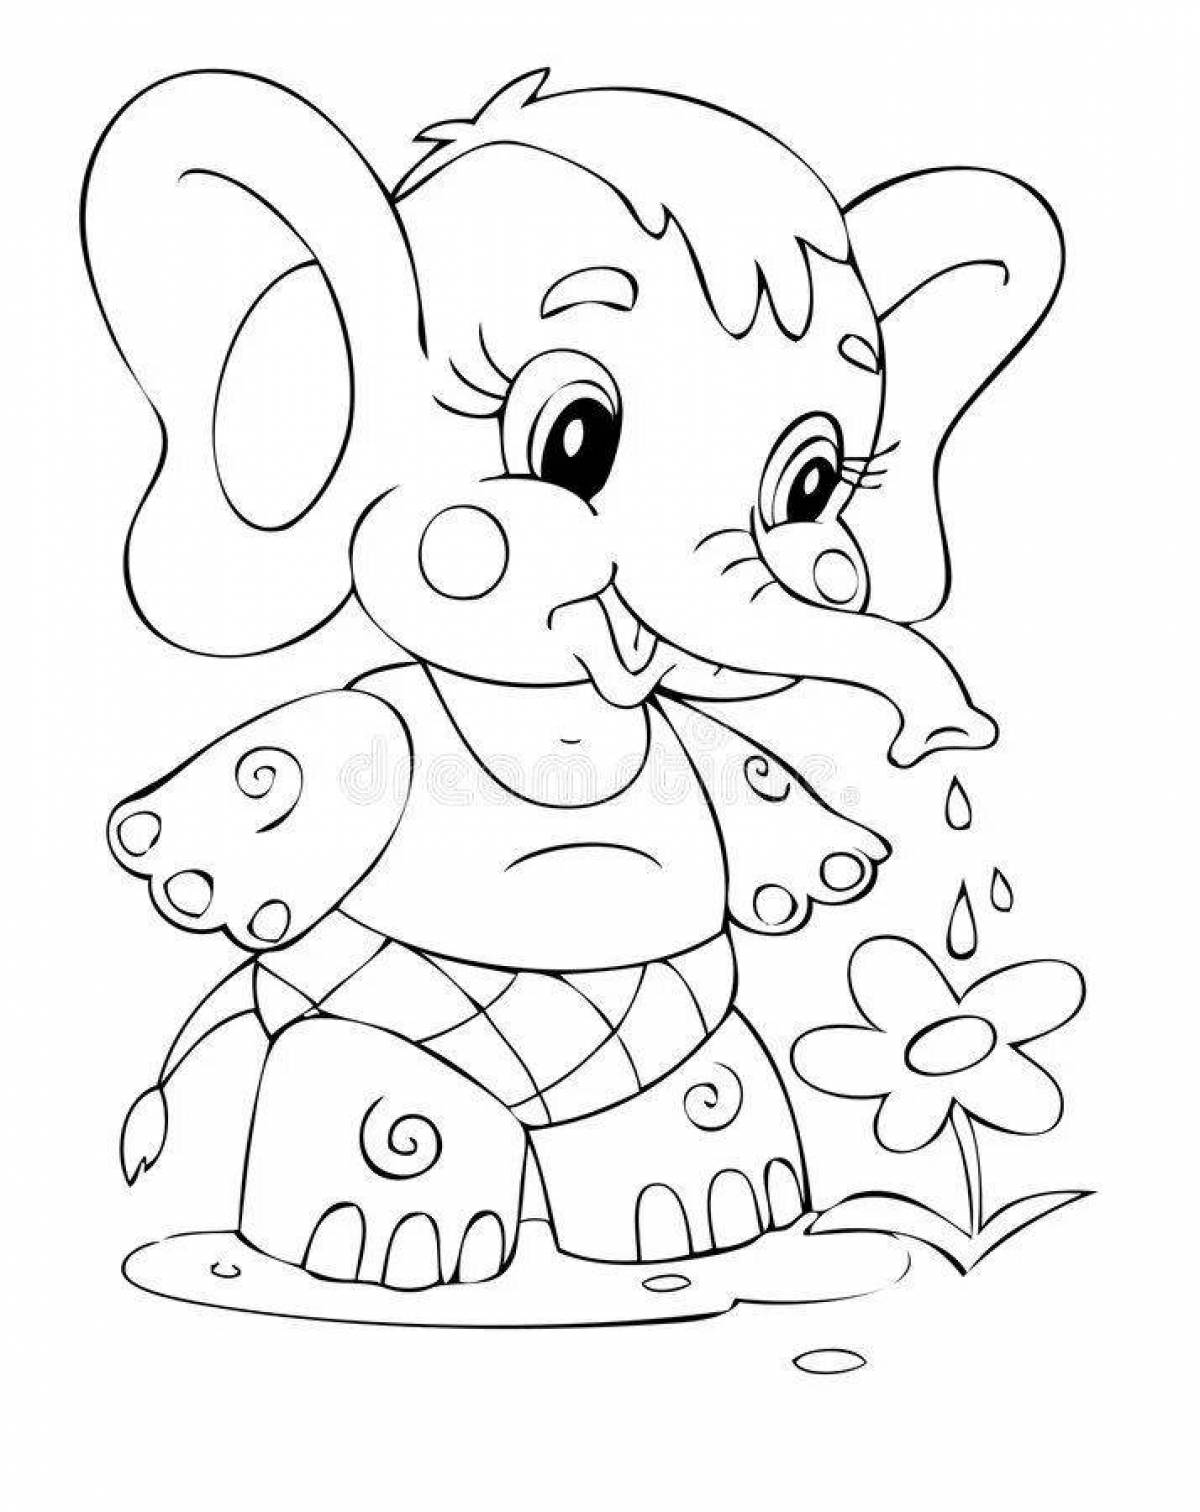 Fabulous pink elephant coloring page